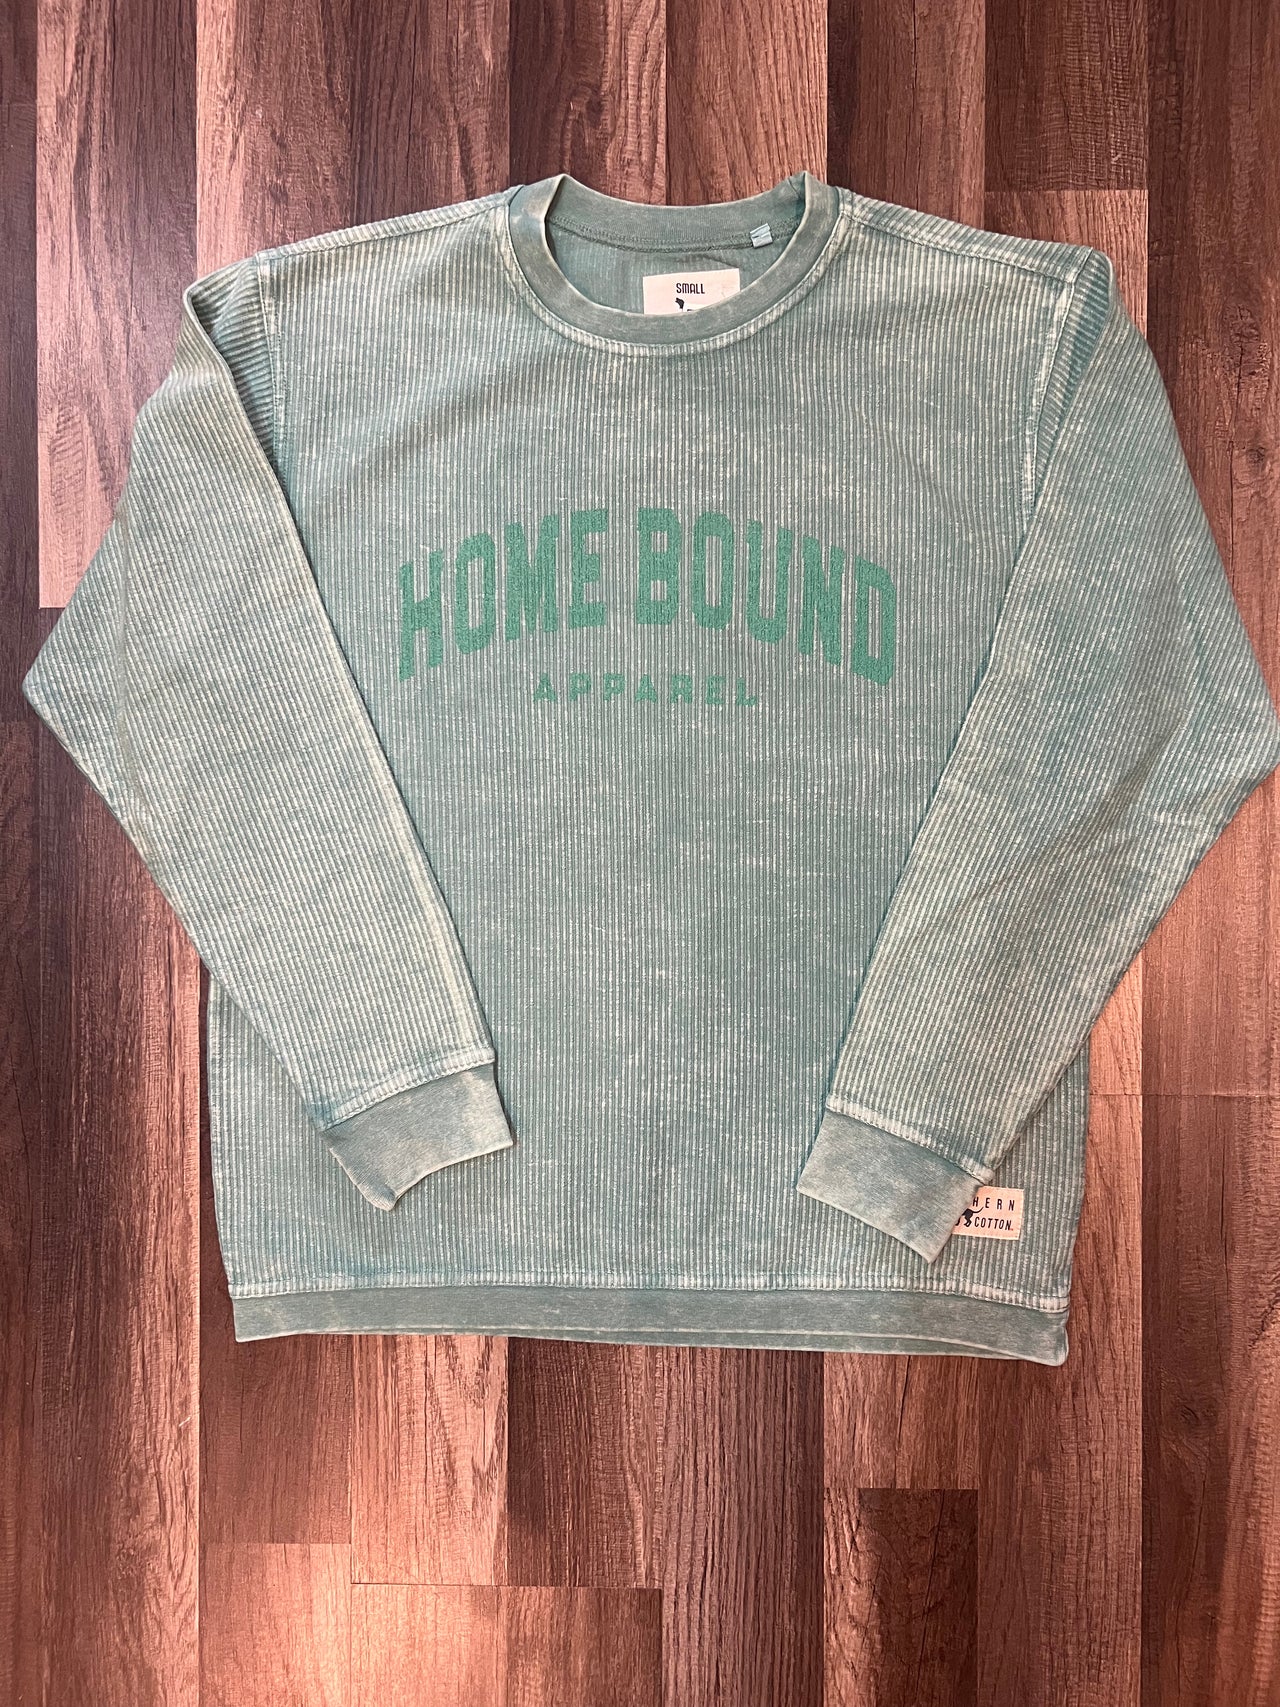 Serenity Shade: Original Corded Soft Sweatshirt in Seafoam Green - Elevate Your Comfort in Stylish Tranquility!